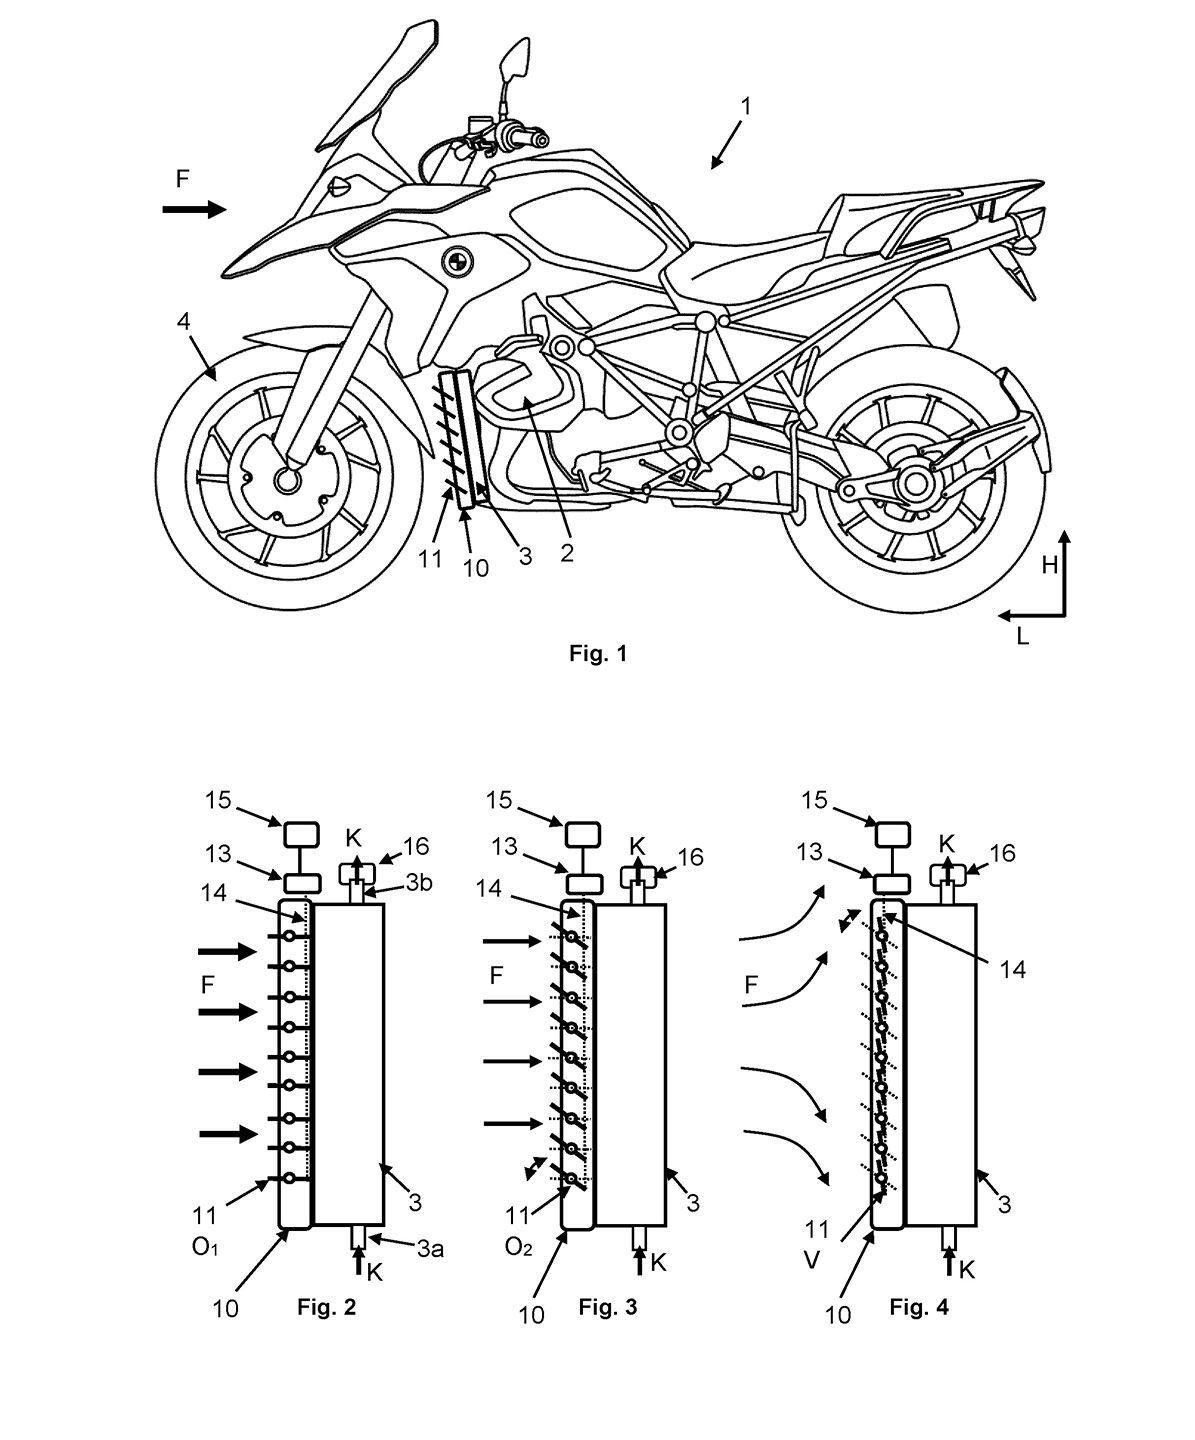 Unlike its cars in which sliding shutters block off the airflow behind the grille, BMW’s idea for the motorcycle equivalent would have louvers that would open and close and stop air from passing through the radiator, improving aerodynamics.